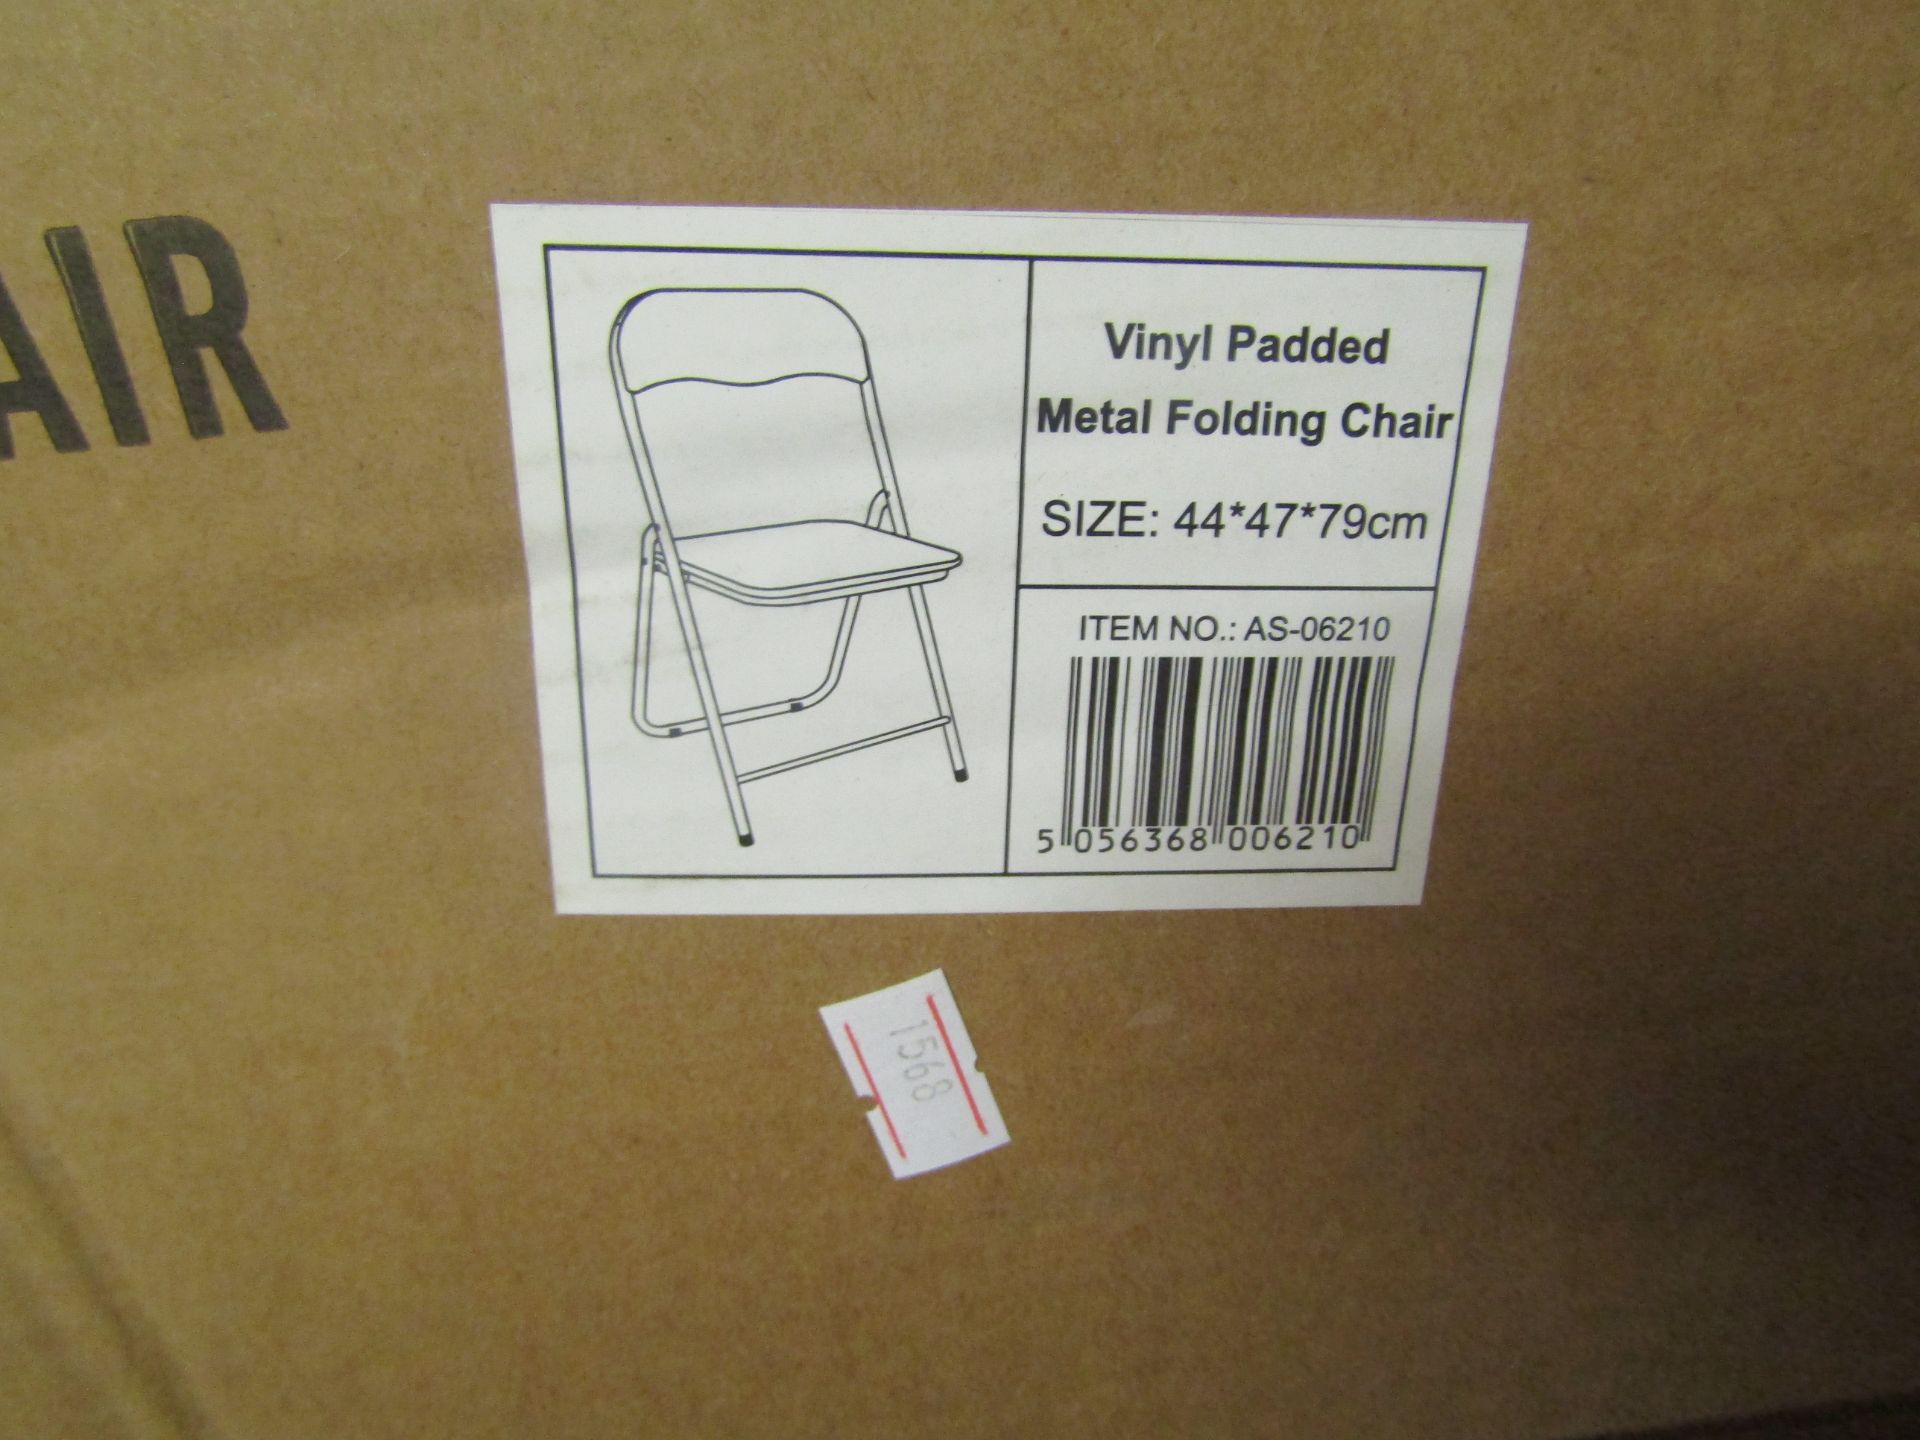 Asab Vinyl Padded Metal Folding Chair, Unchecked & Boxed.